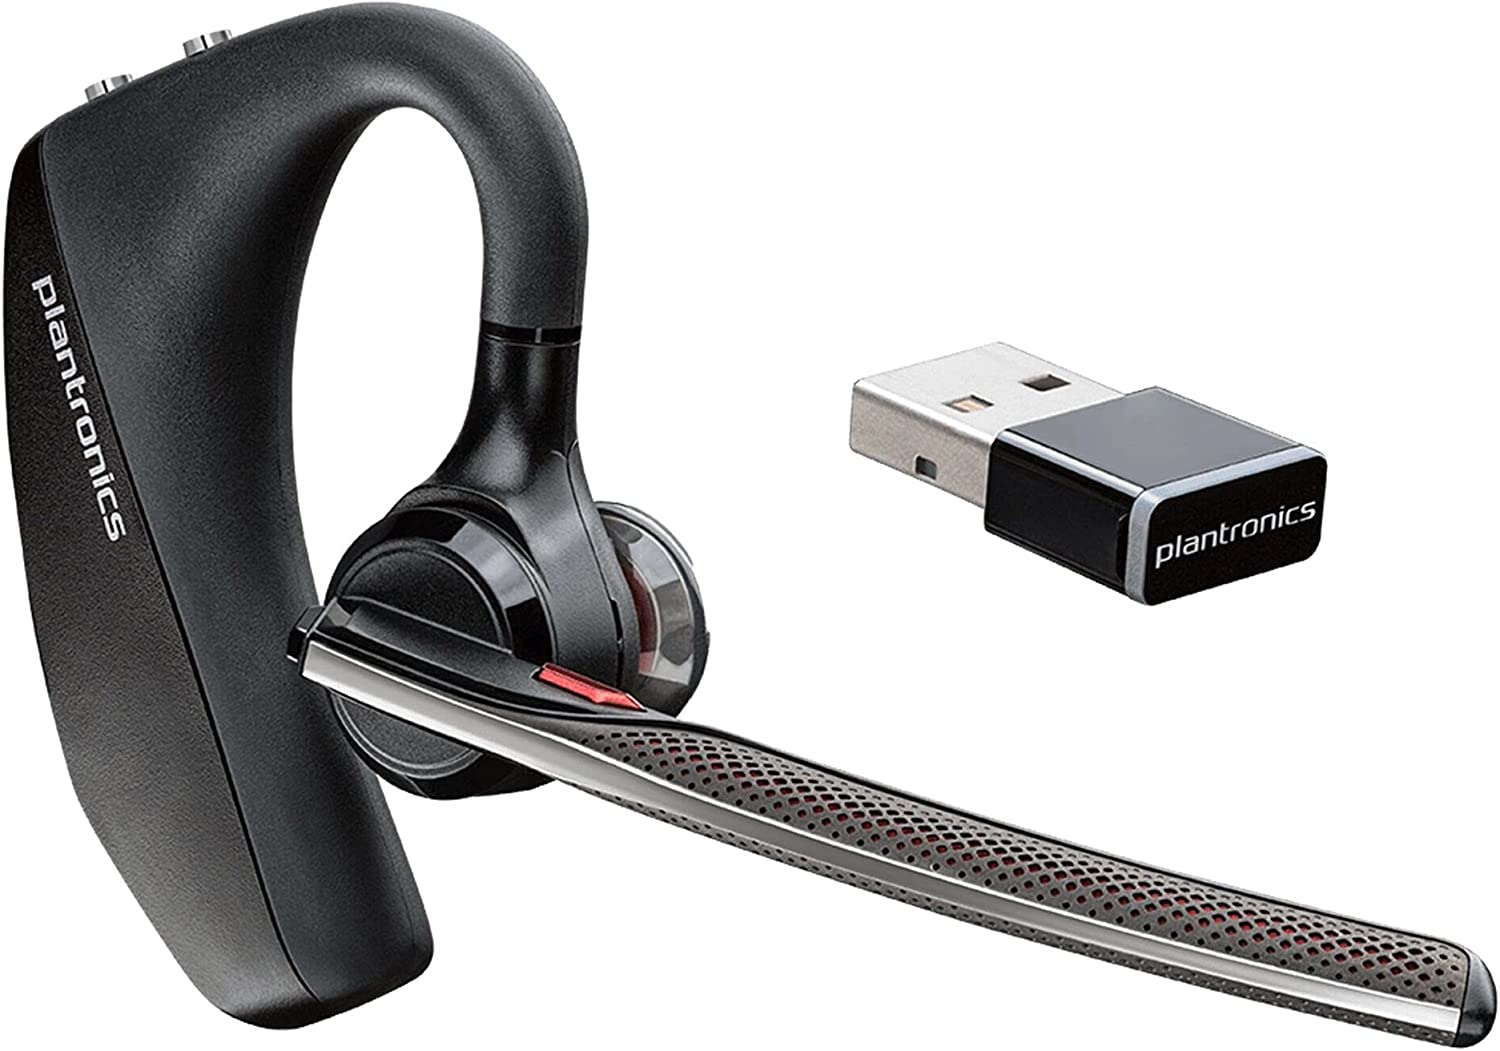 Plantronics - Voyager 5200 UC with BT700 ADAPTER, Black